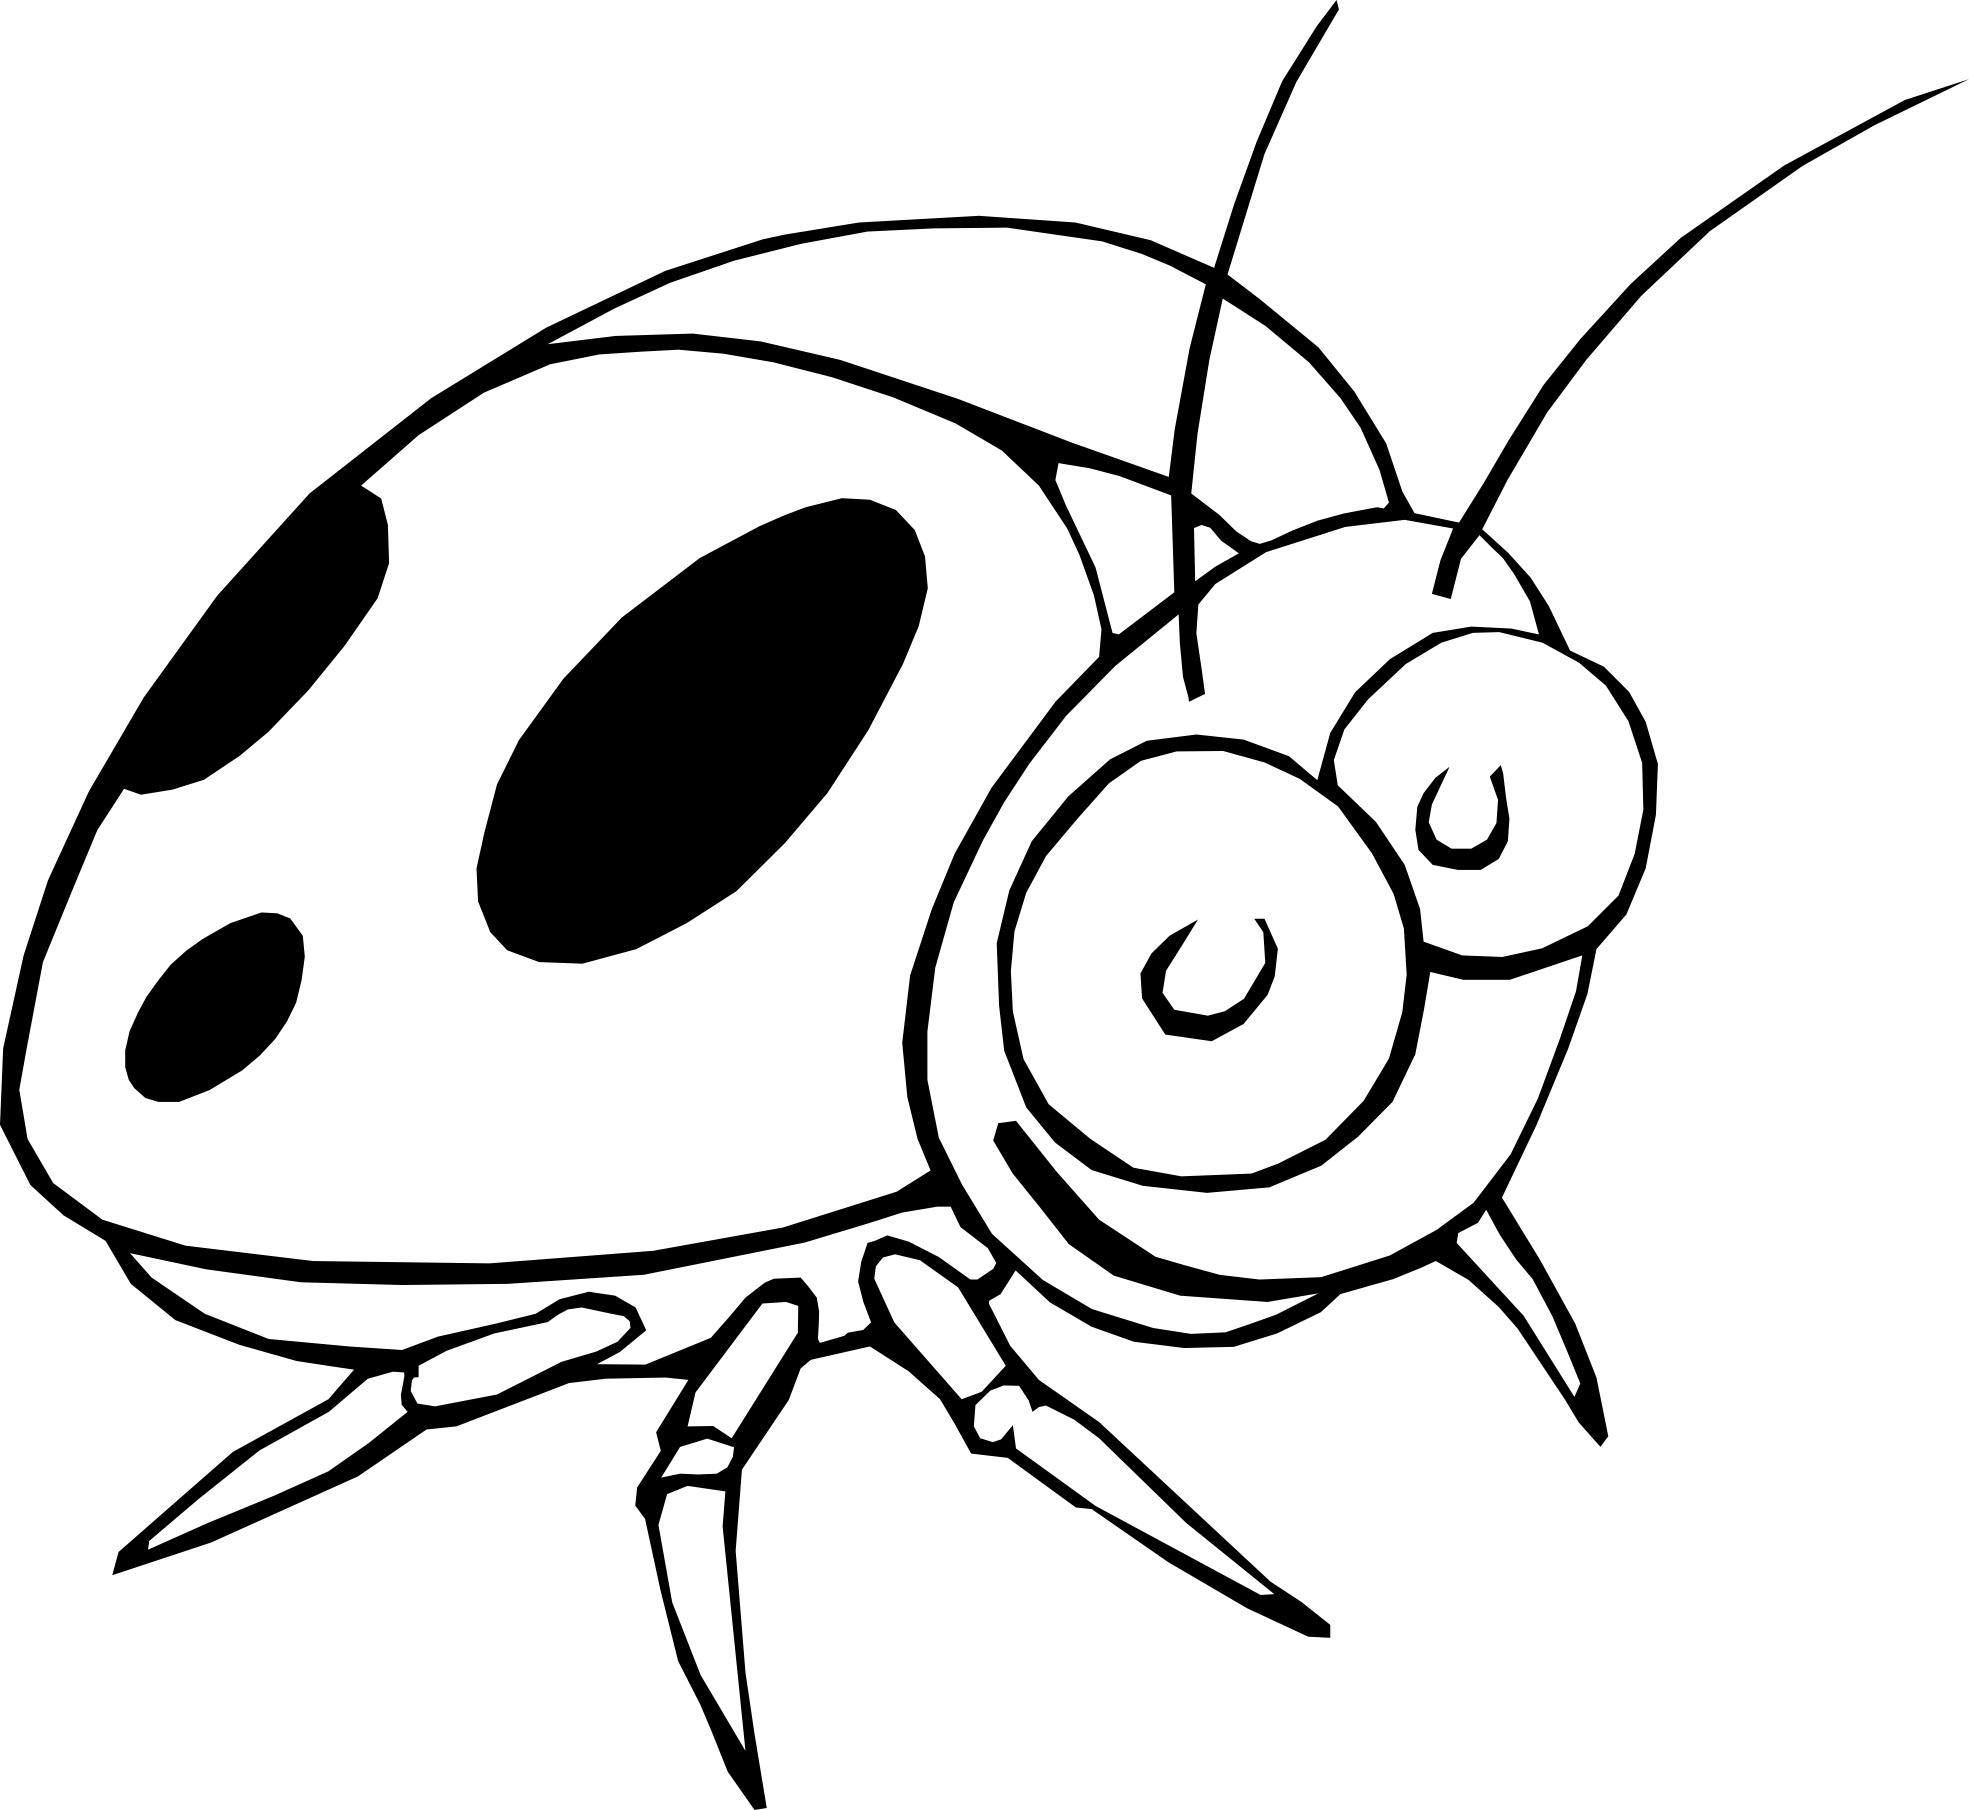 Free Printable Ladybug Coloring Pages For Kids - Animal Place